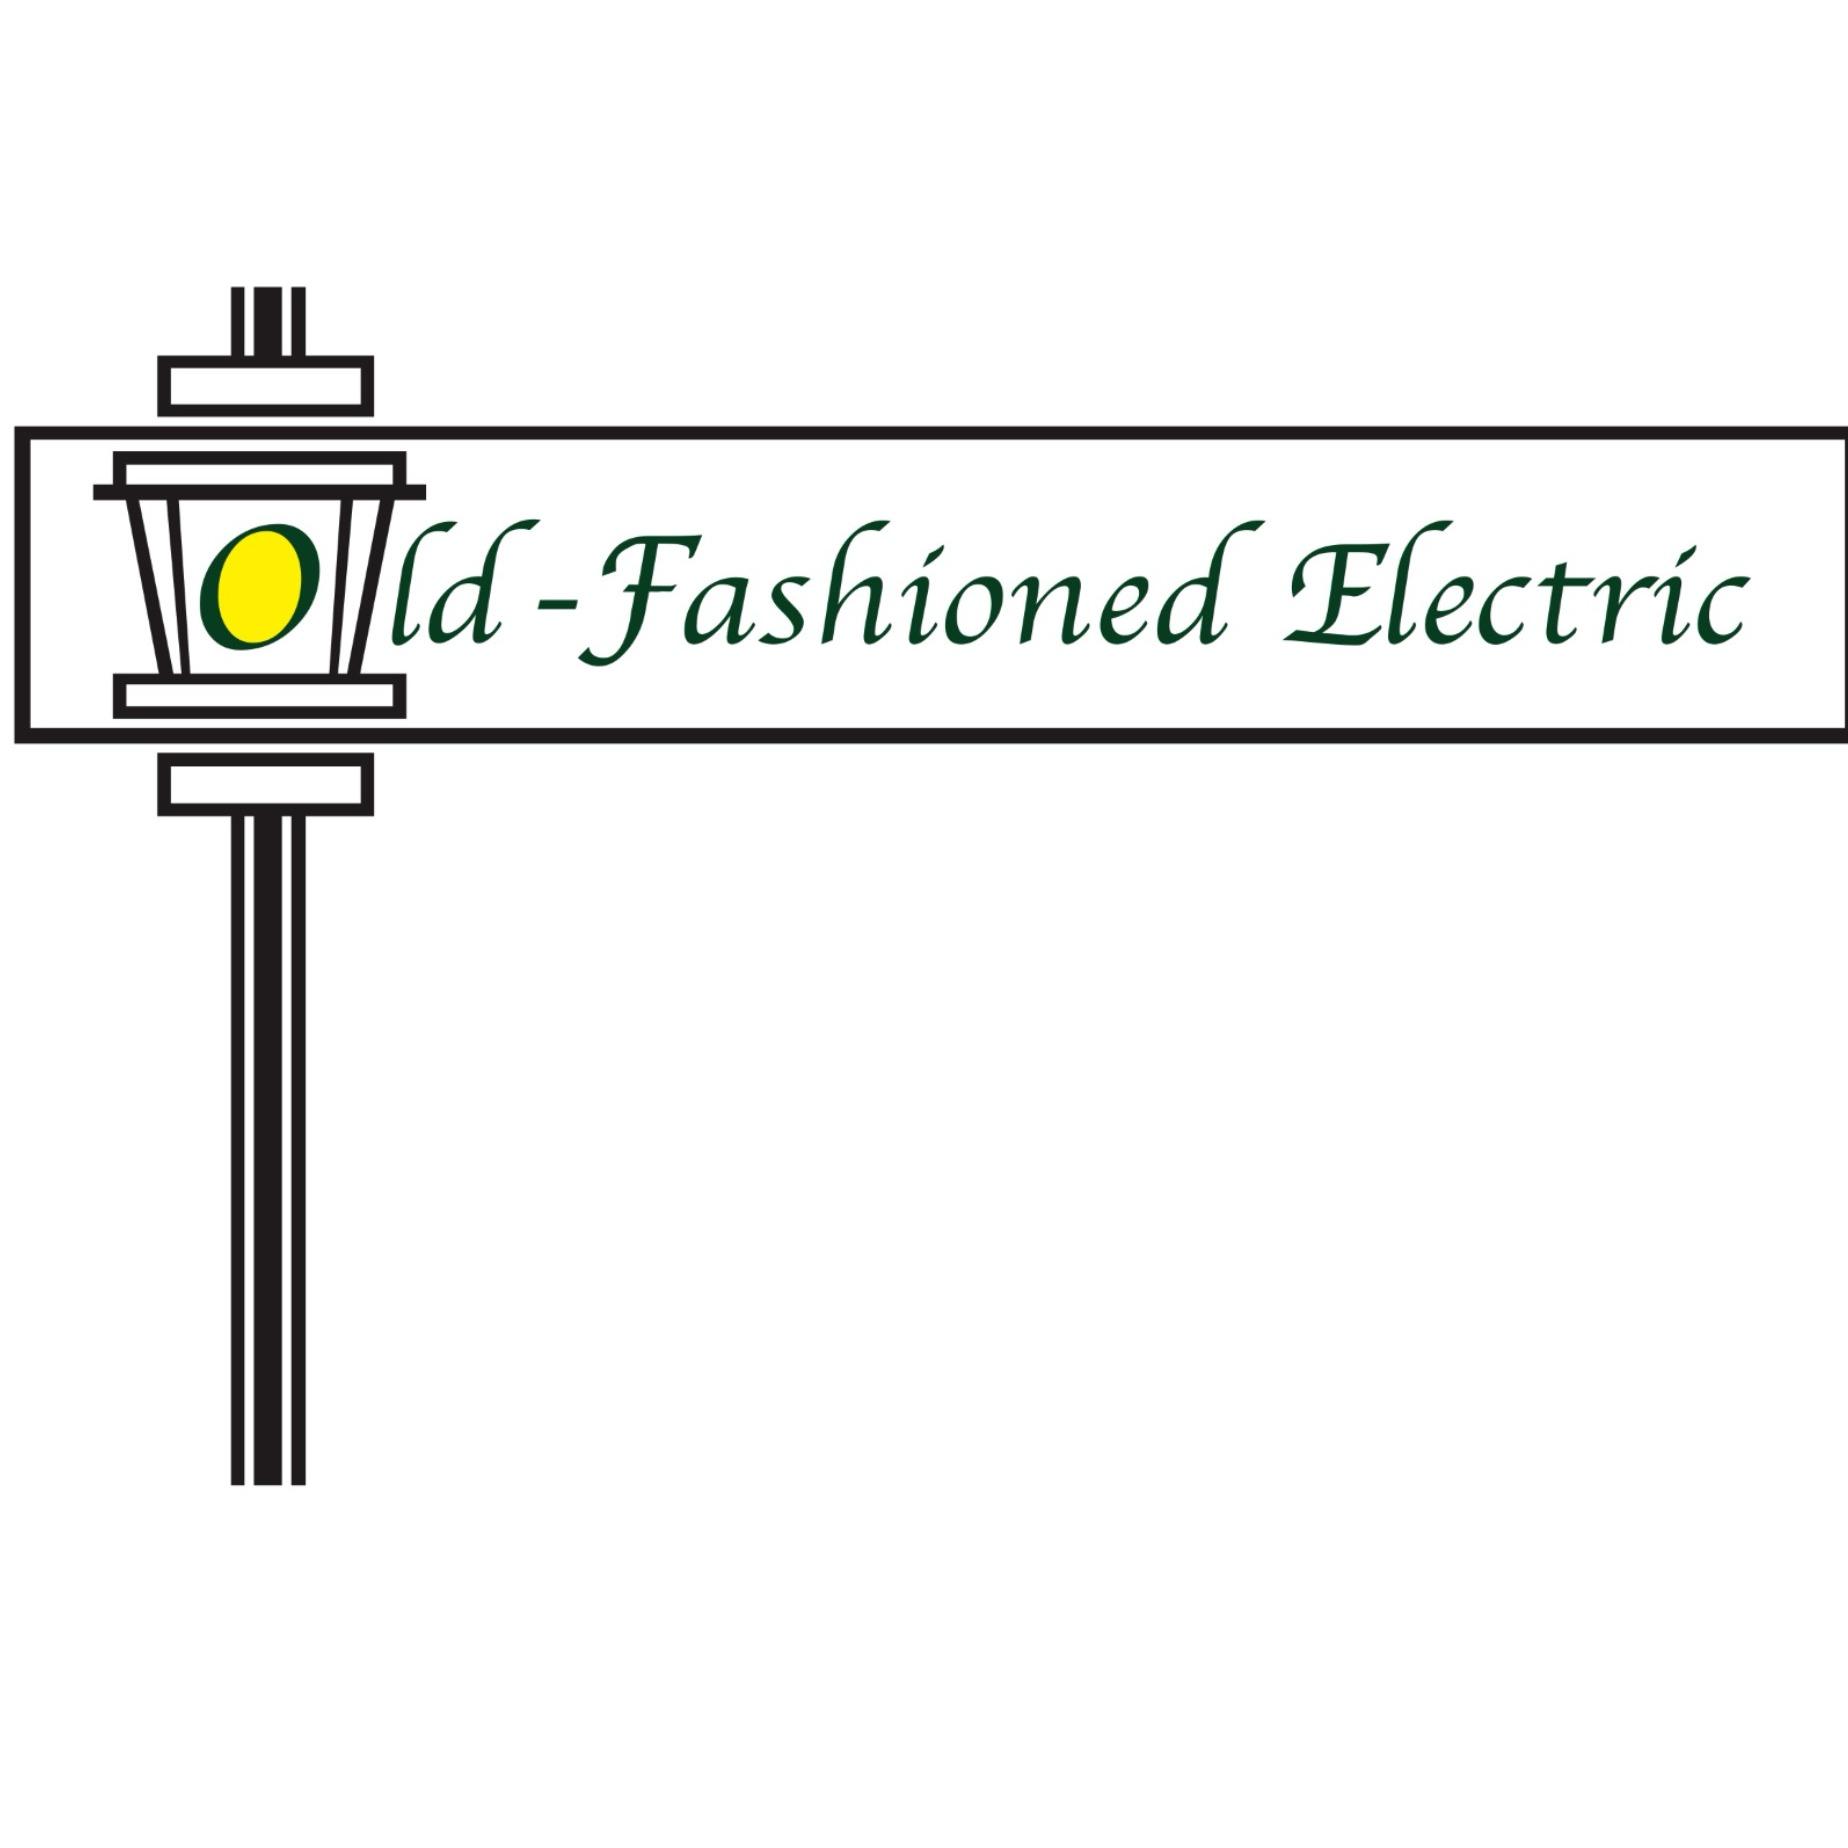 Old-Fashioned Electric